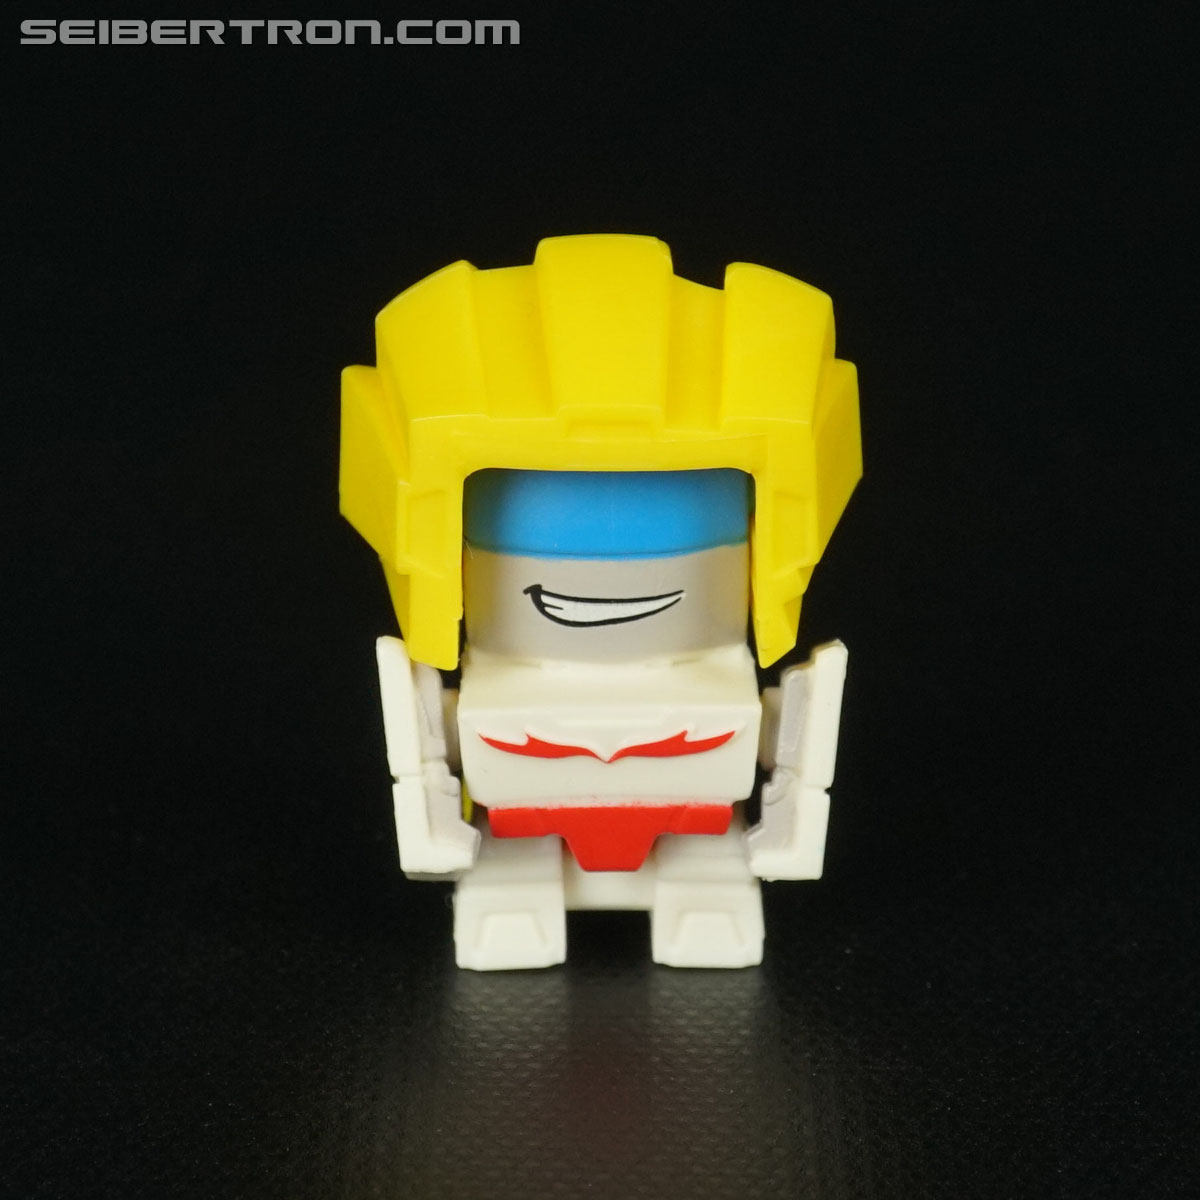 Transformers Botbots Spud Muffin (Image #1 of 40)